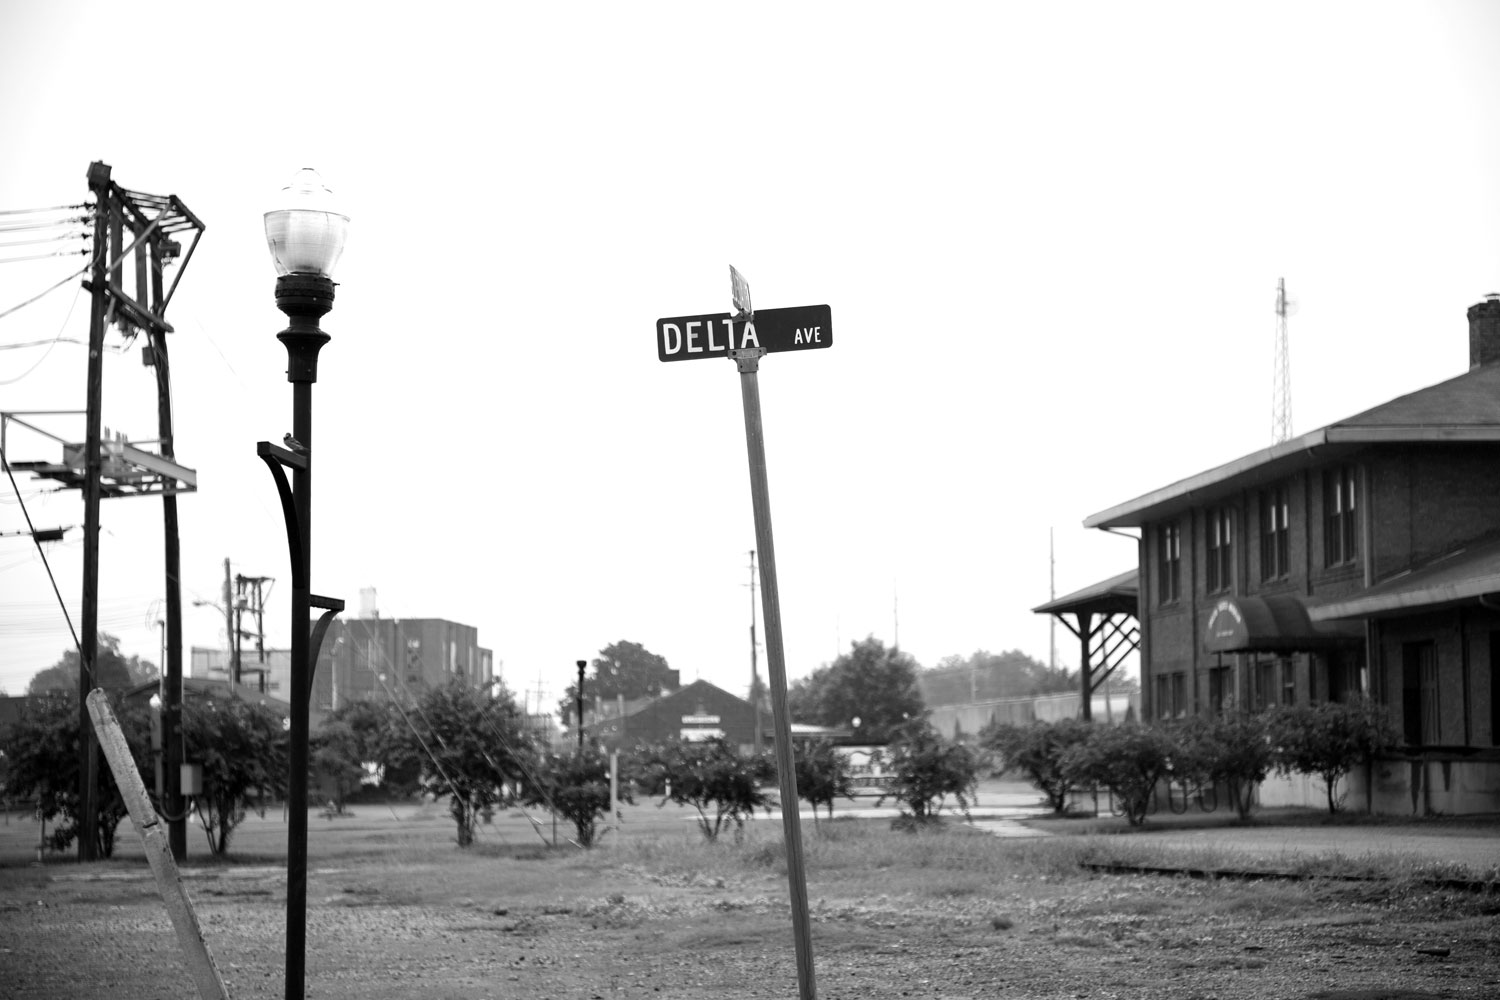 Delta Avenue in Clarksdale, Miss., a town that has been historically described as “Ground Zero” for blues aficionados.